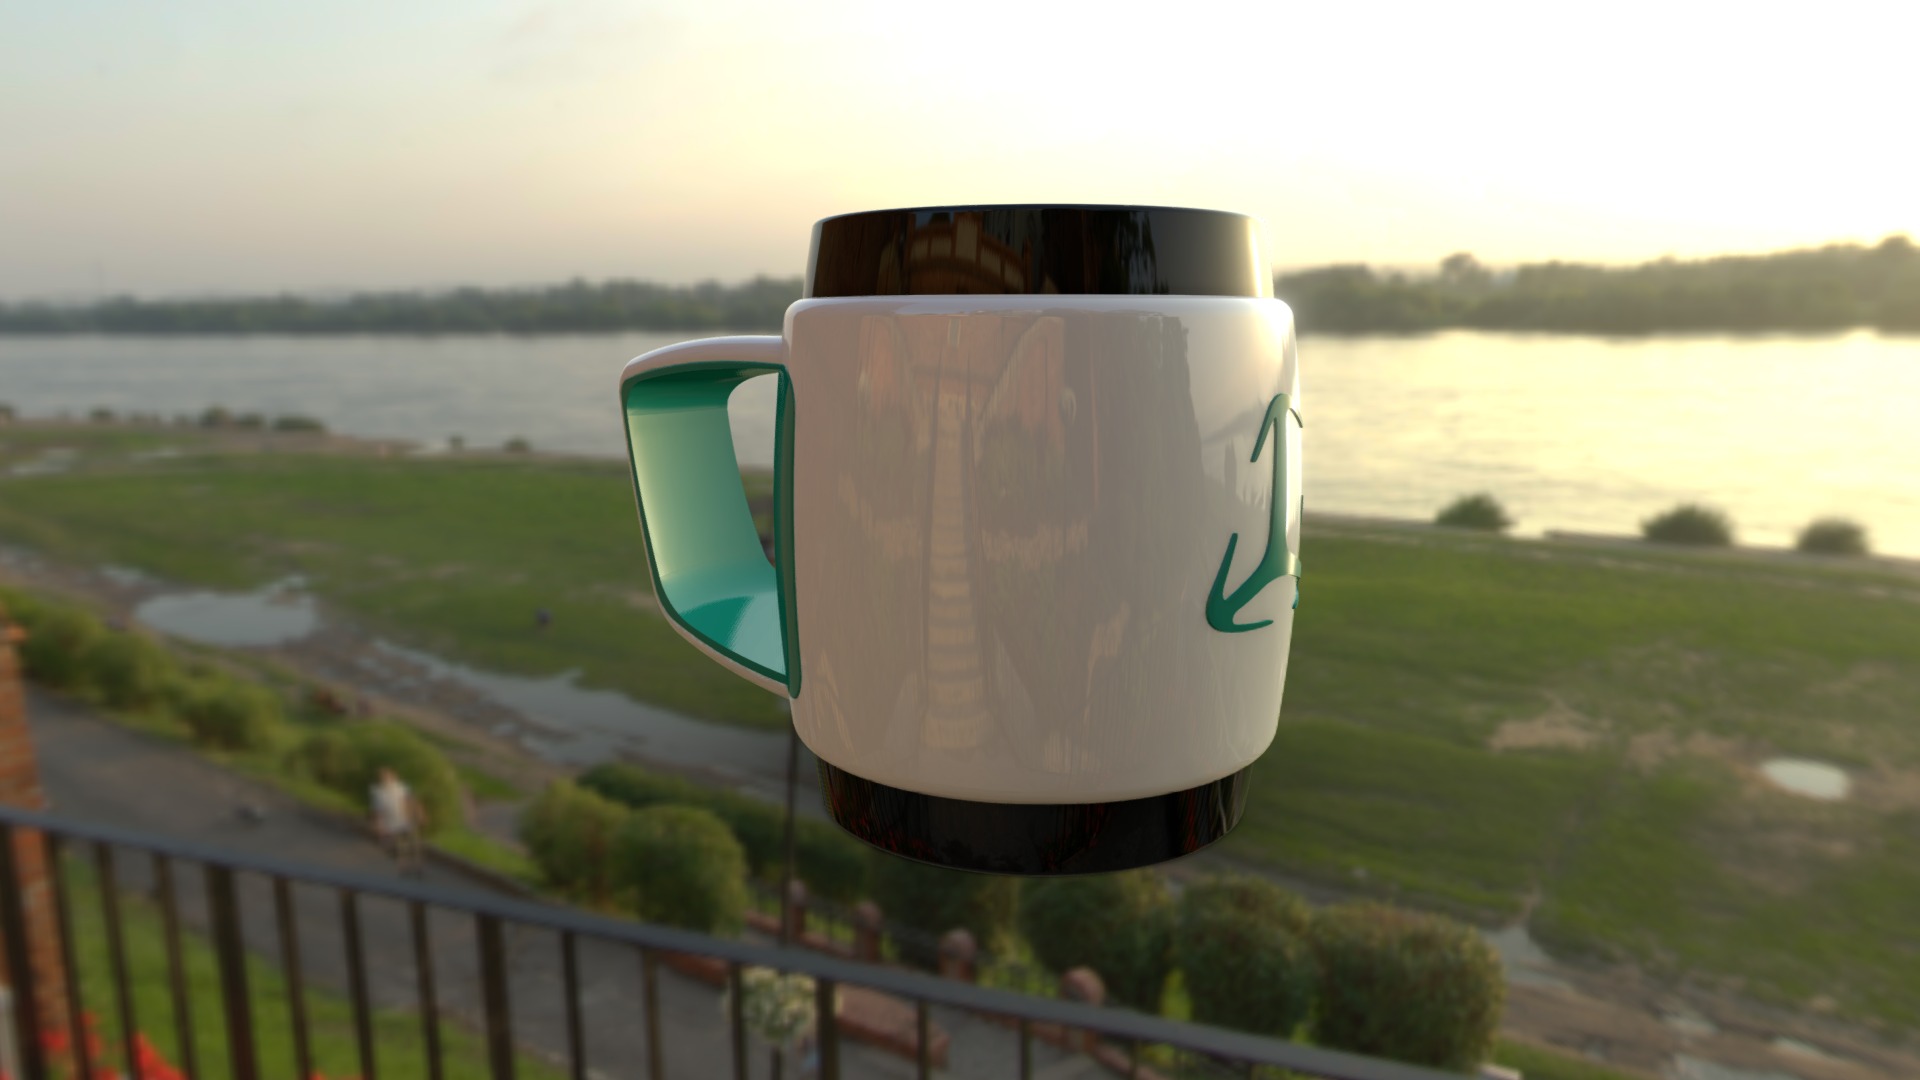 3D model #SSRChallenge Taza - This is a 3D model of the #SSRChallenge Taza. The 3D model is about a large white cup on a railing overlooking a field and a river.